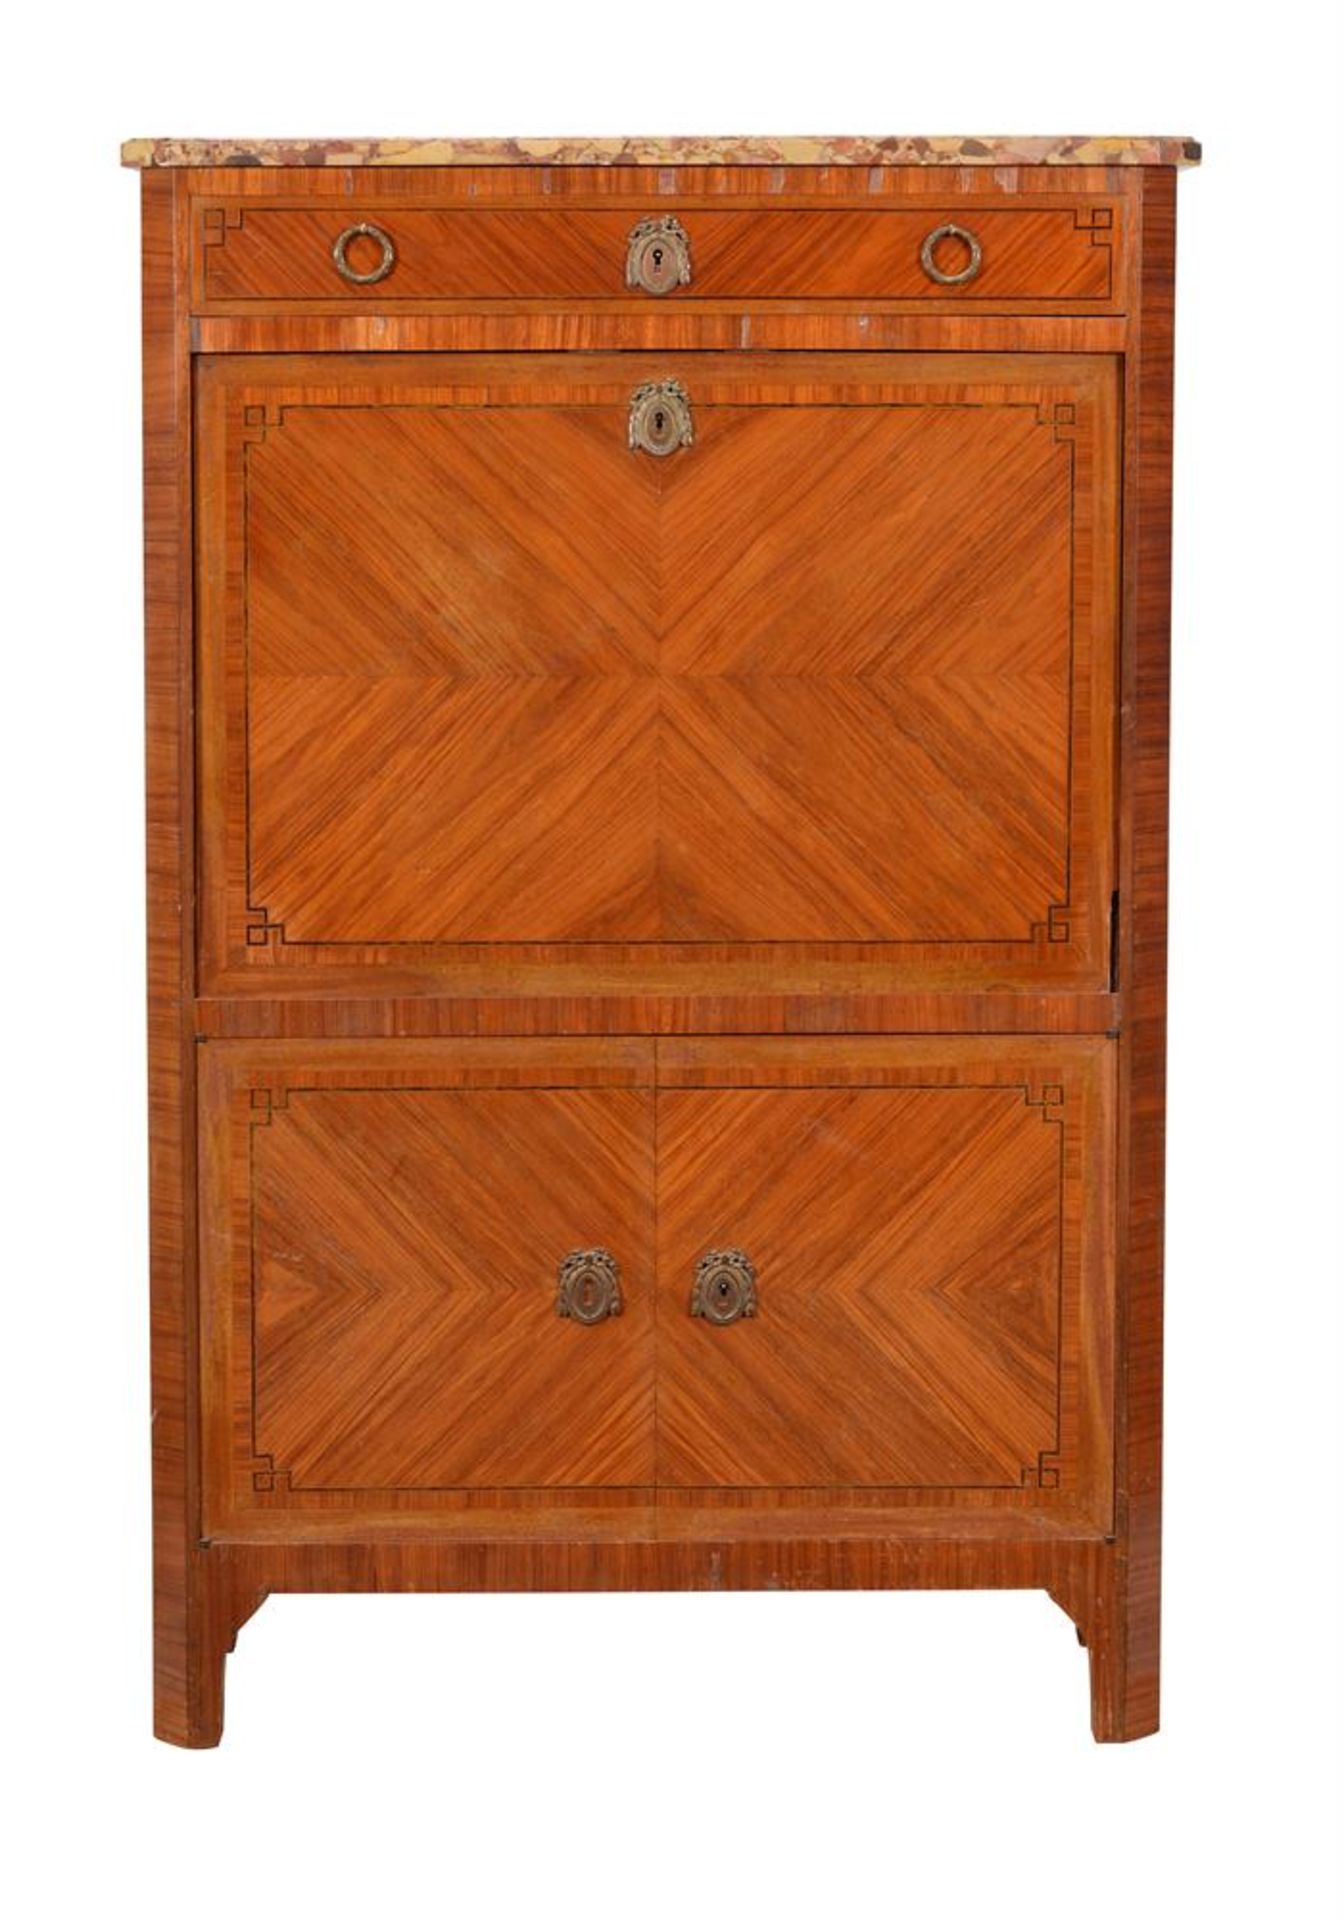 Y A KINGWOOD, TULIPWOOD AND INLAID SECRETAIRE A ABATTANT, IN LOUIS XV/XVI TRANSITIONAL STYLE